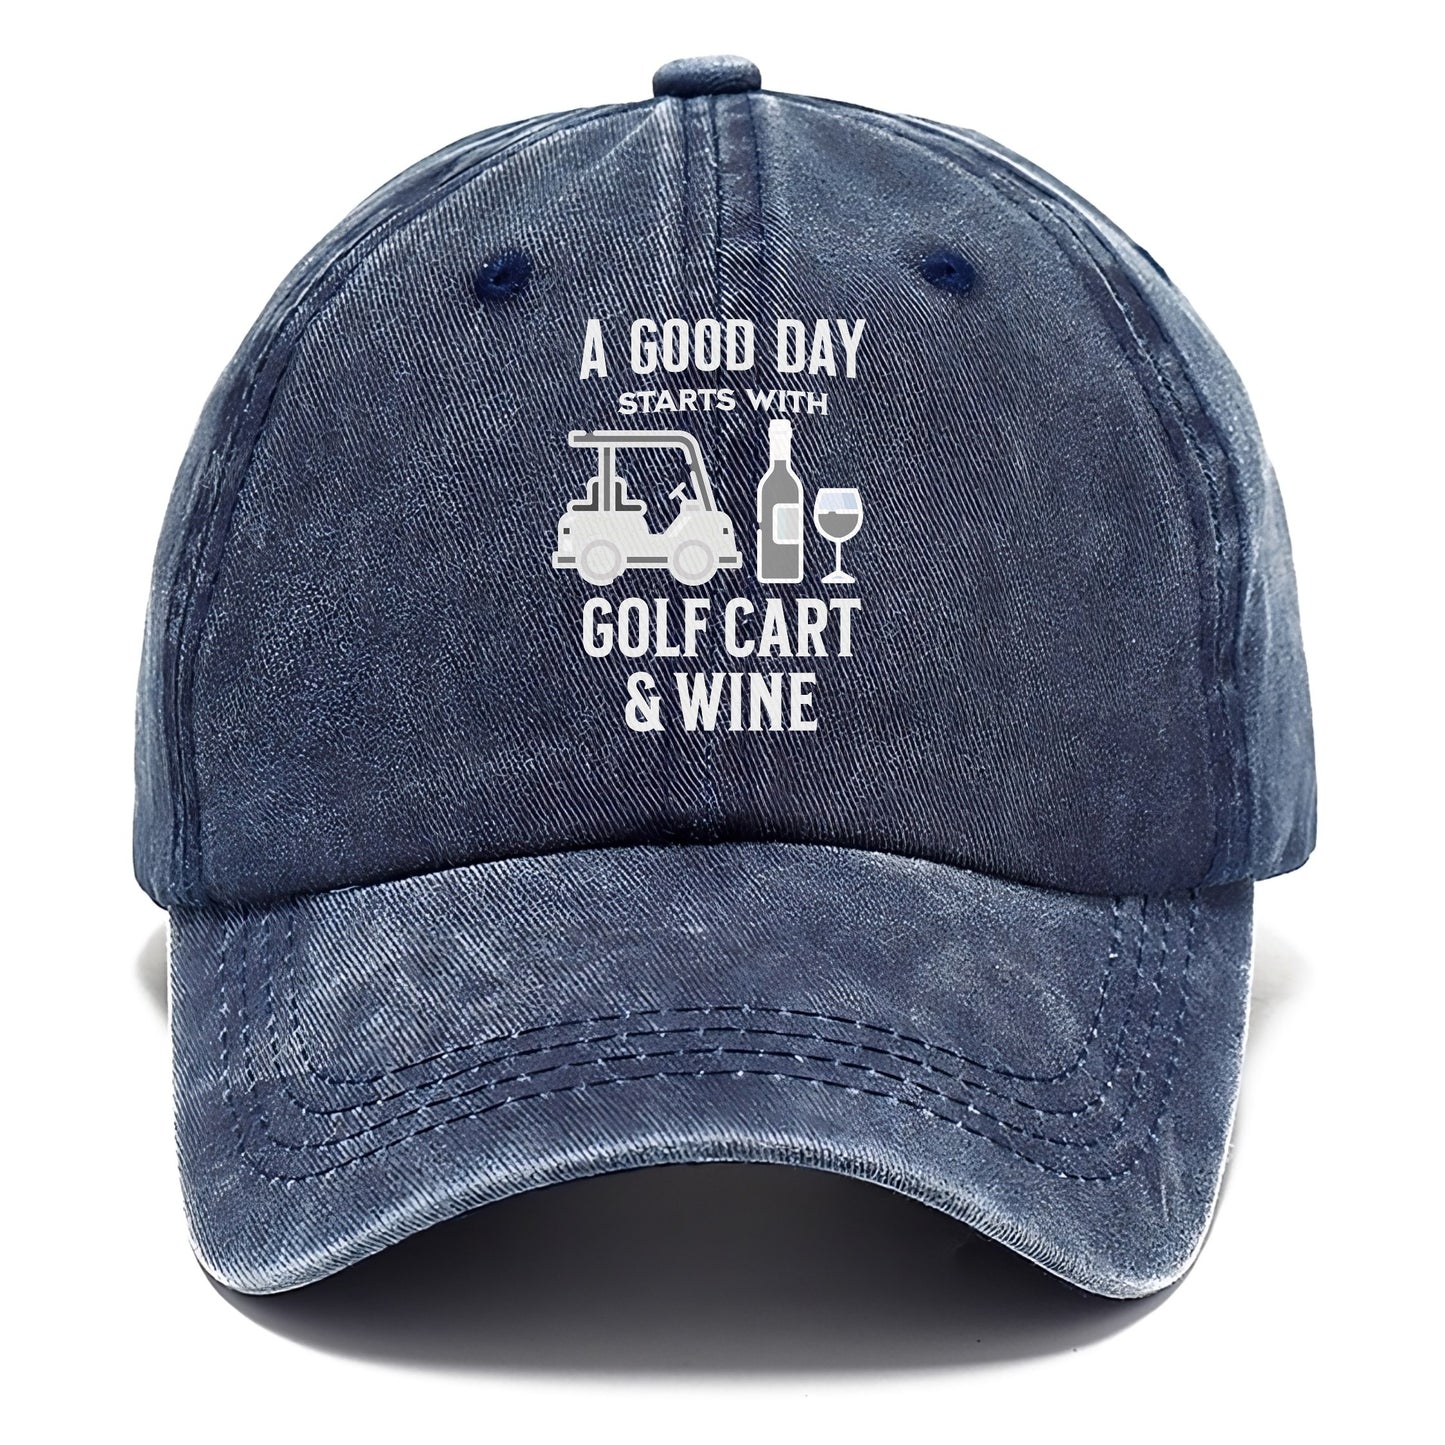 a good day starts with golf cart & wine Hat